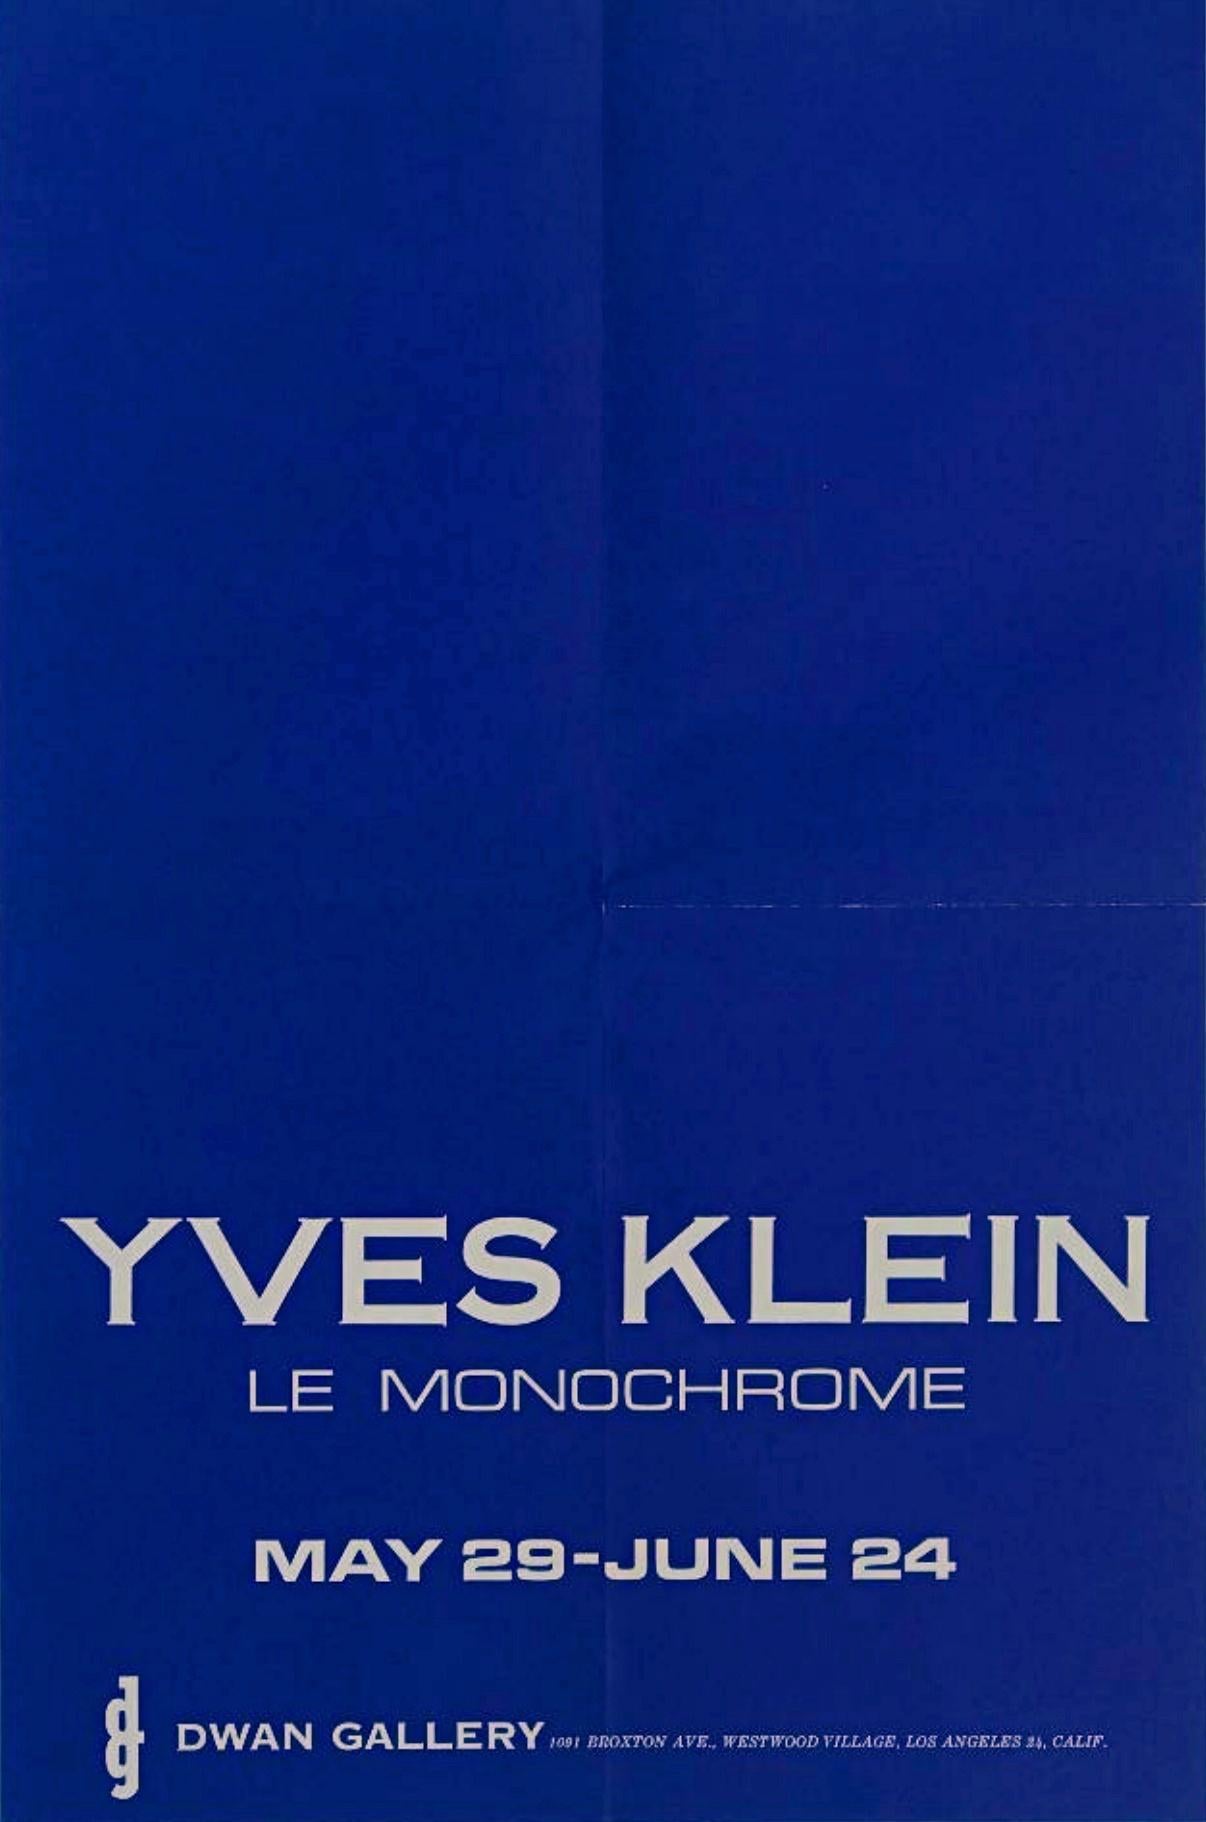 Yves Klein
Yves Klein at Dwan Gallery Poster, 1961
Extremely rare Offset lithograph poster/exhibition invitation designed by artist
17 1/2 × 11 1/4 inches
Unframed
This is the original lithographic invitation from the historic exhibition:
Yves Klein